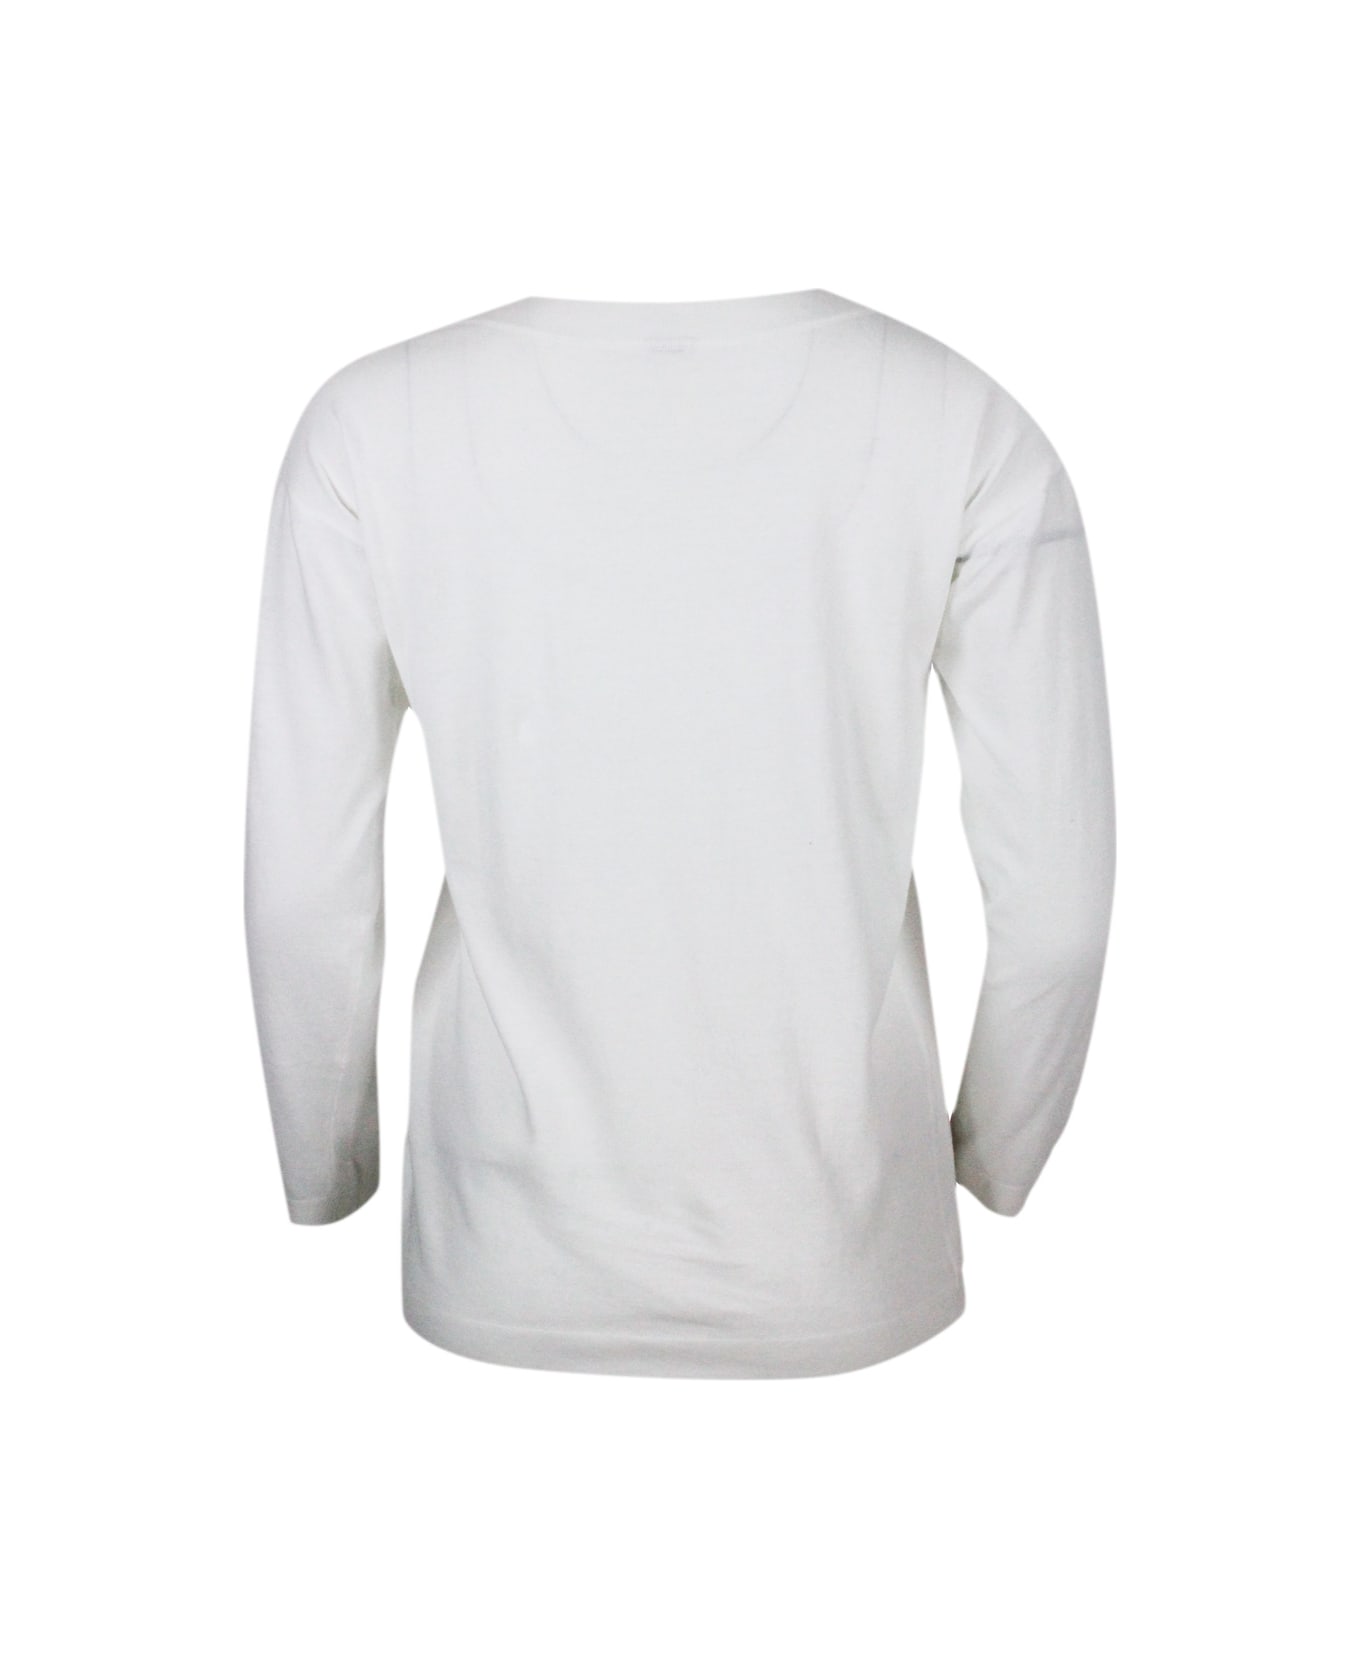 Malo Crew-neck, Long-sleeved Shirt In Cotton Thread With Buttons On The Shoulder - White ニットウェア